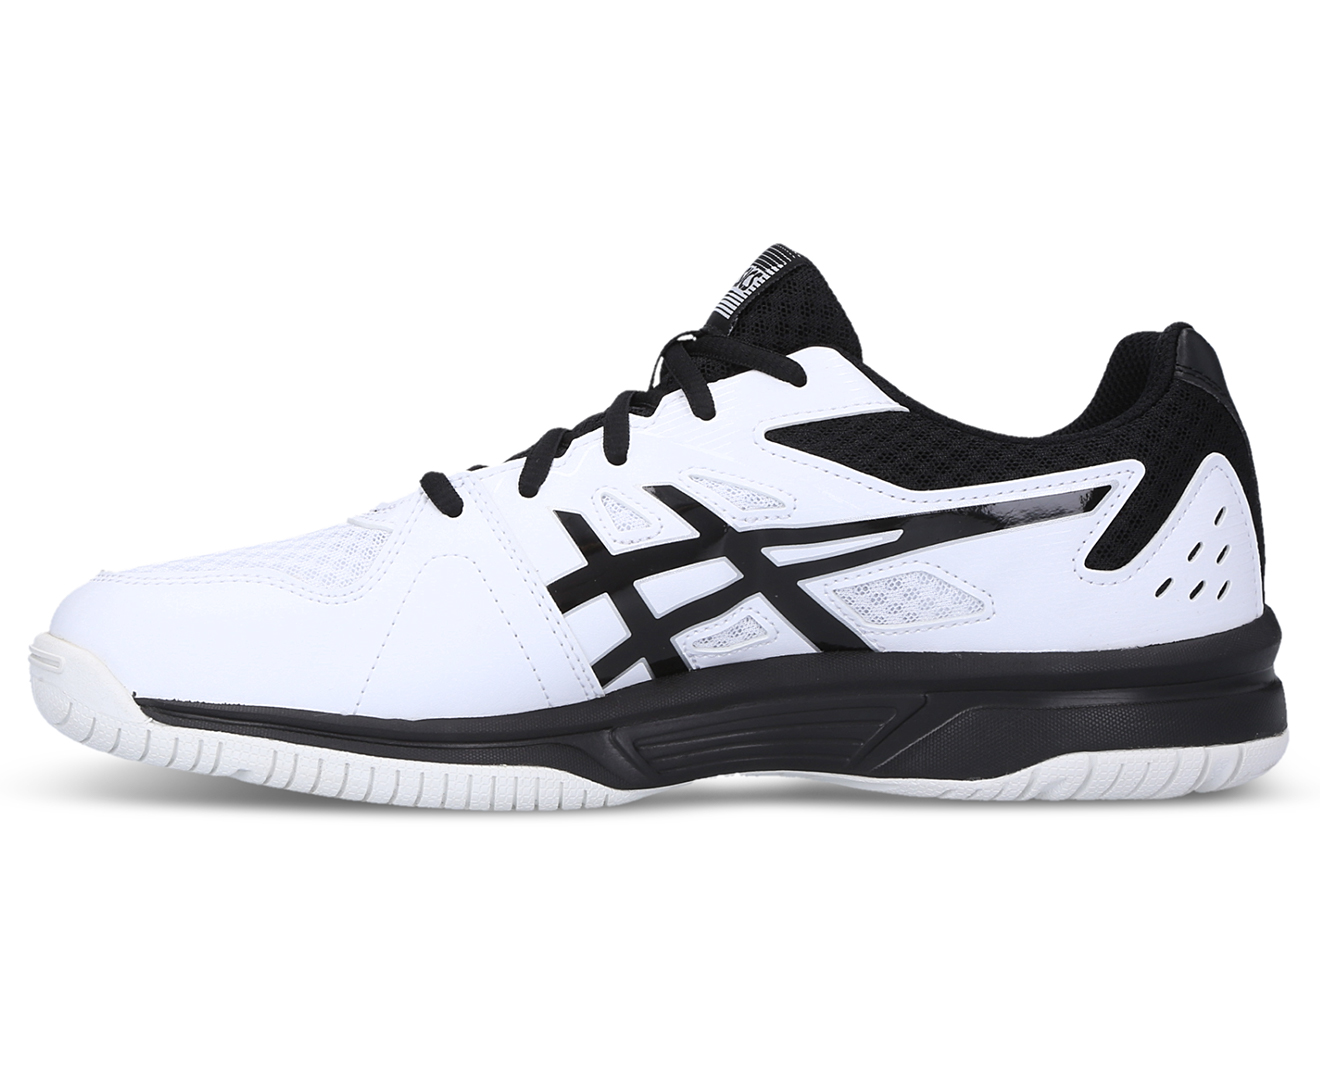 ASICS Men's Upcourt 3 Volleyball Shoes - White/Black | Catch.co.nz